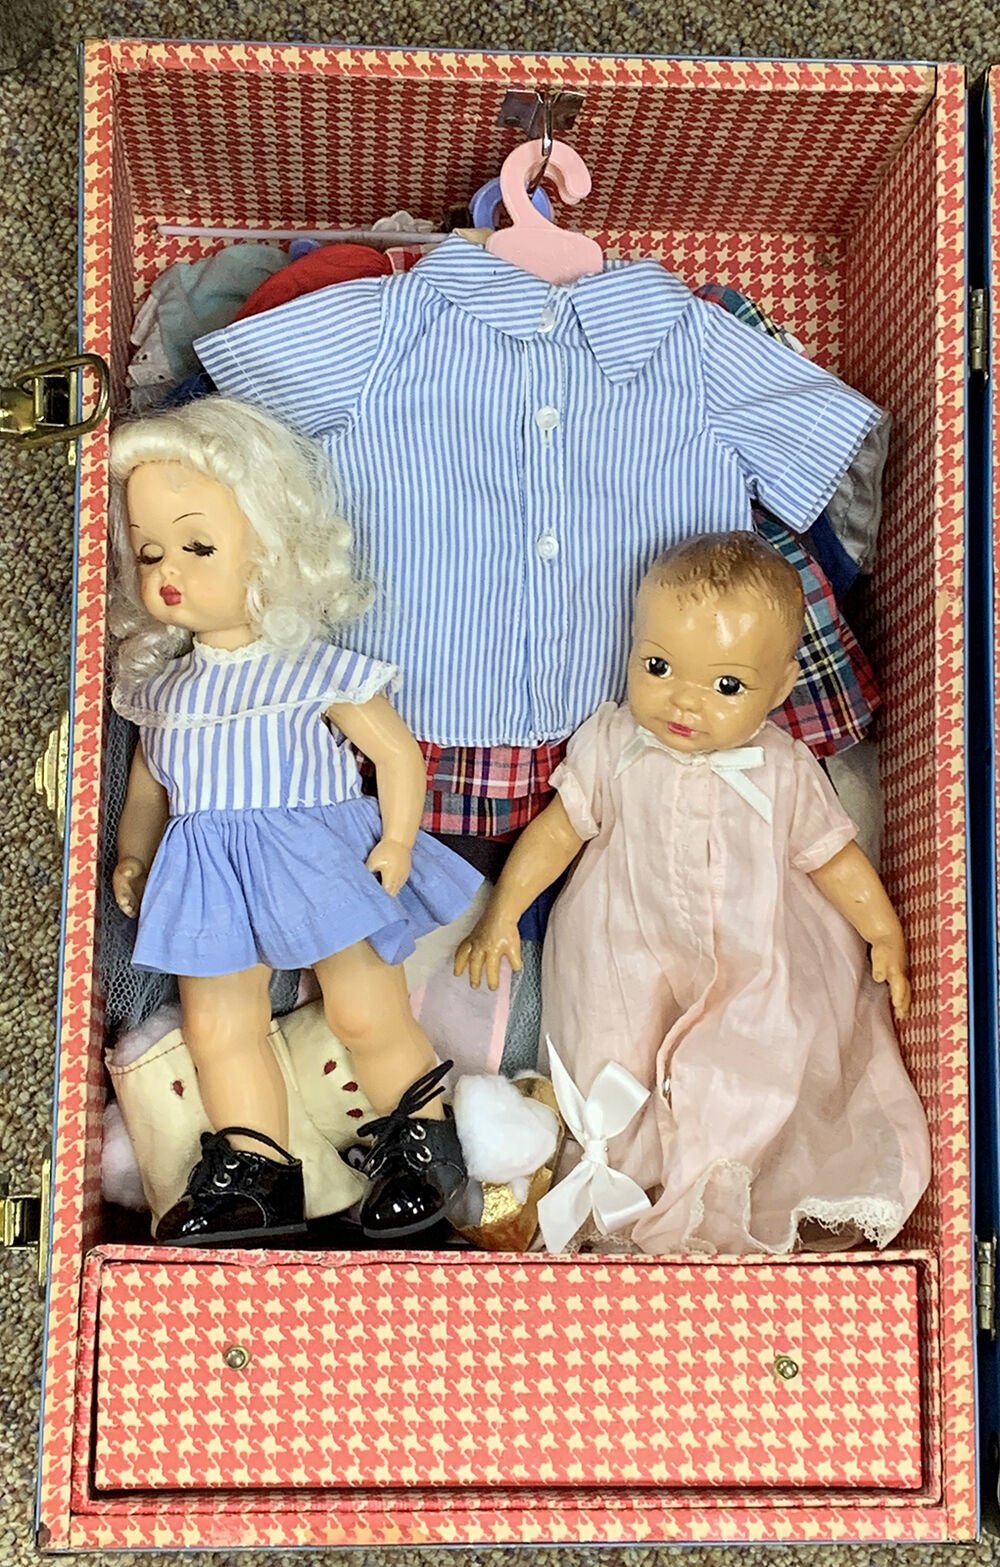 Nebraska-made Terri Lee dolls were all the rage in the ‘40s and ‘50s